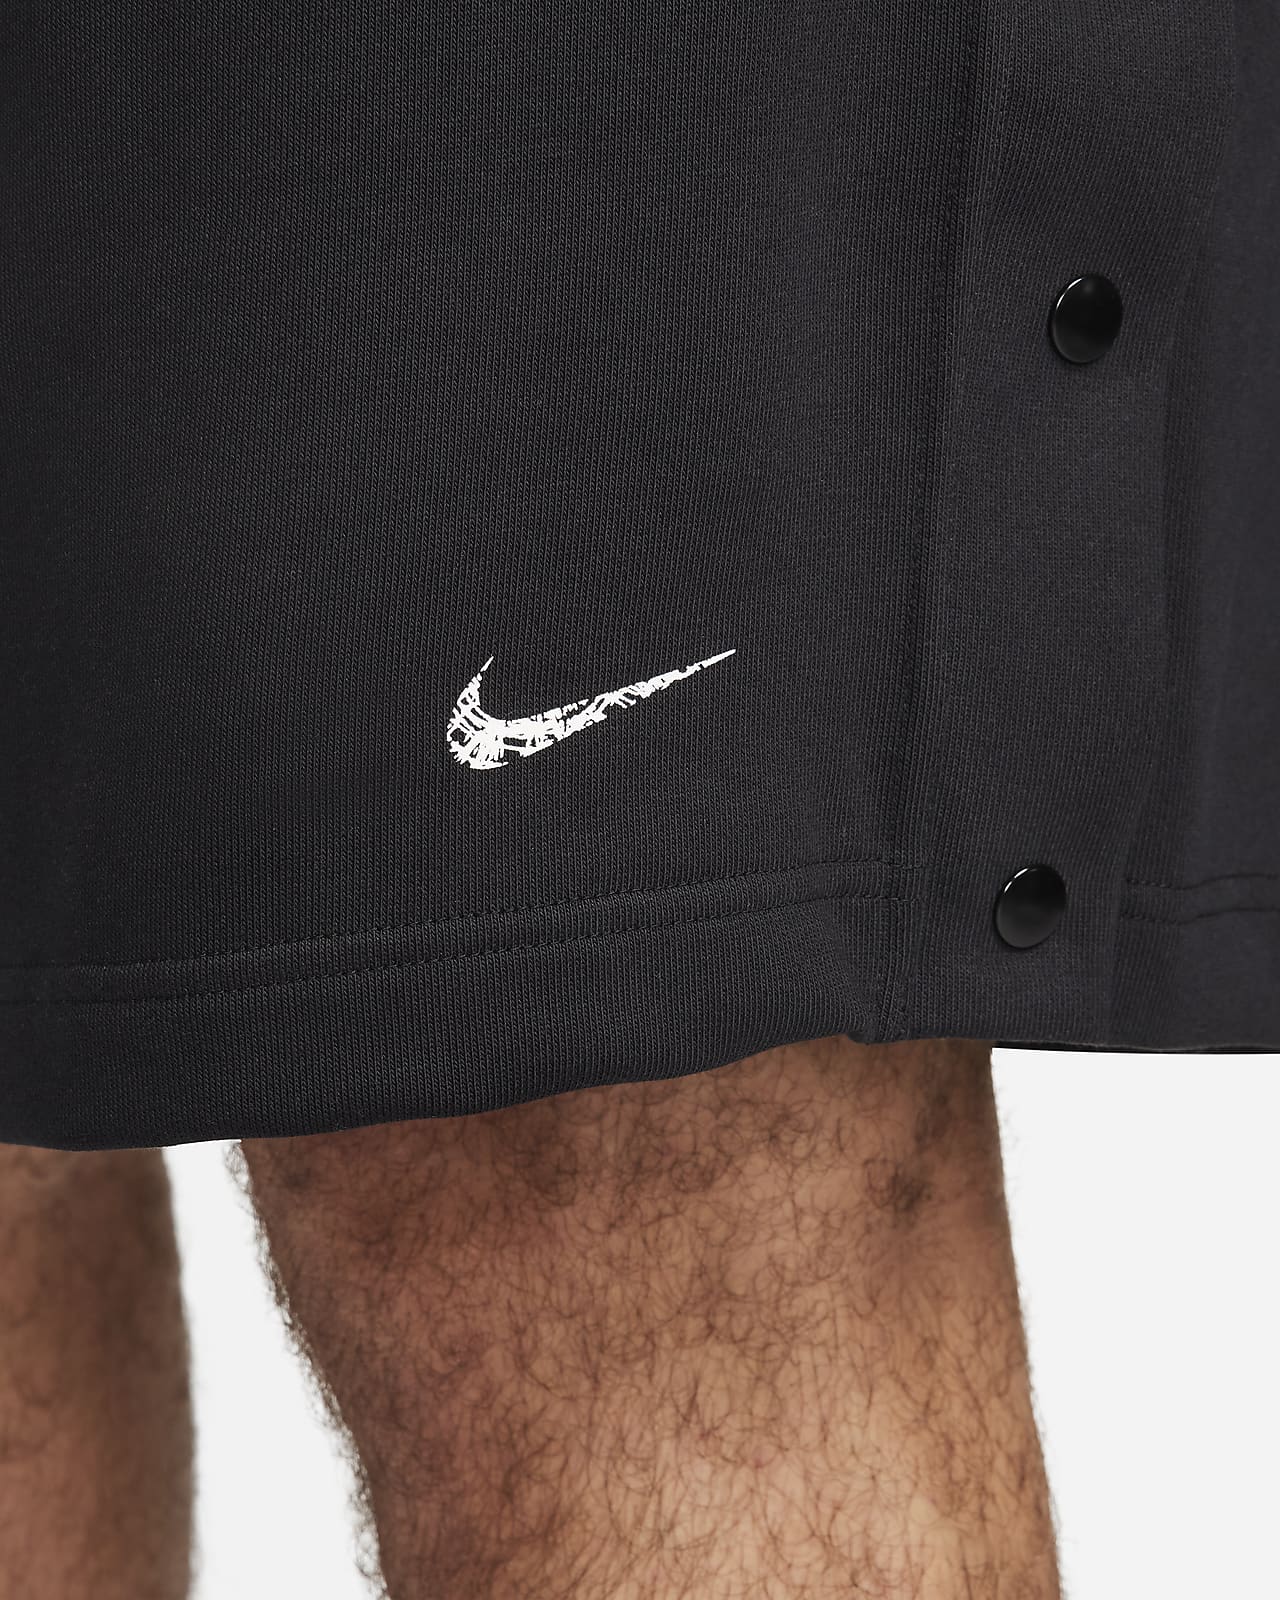 How To With Angelus Direct Black Suede Dye On Nike Shoes 🎨#shorts 